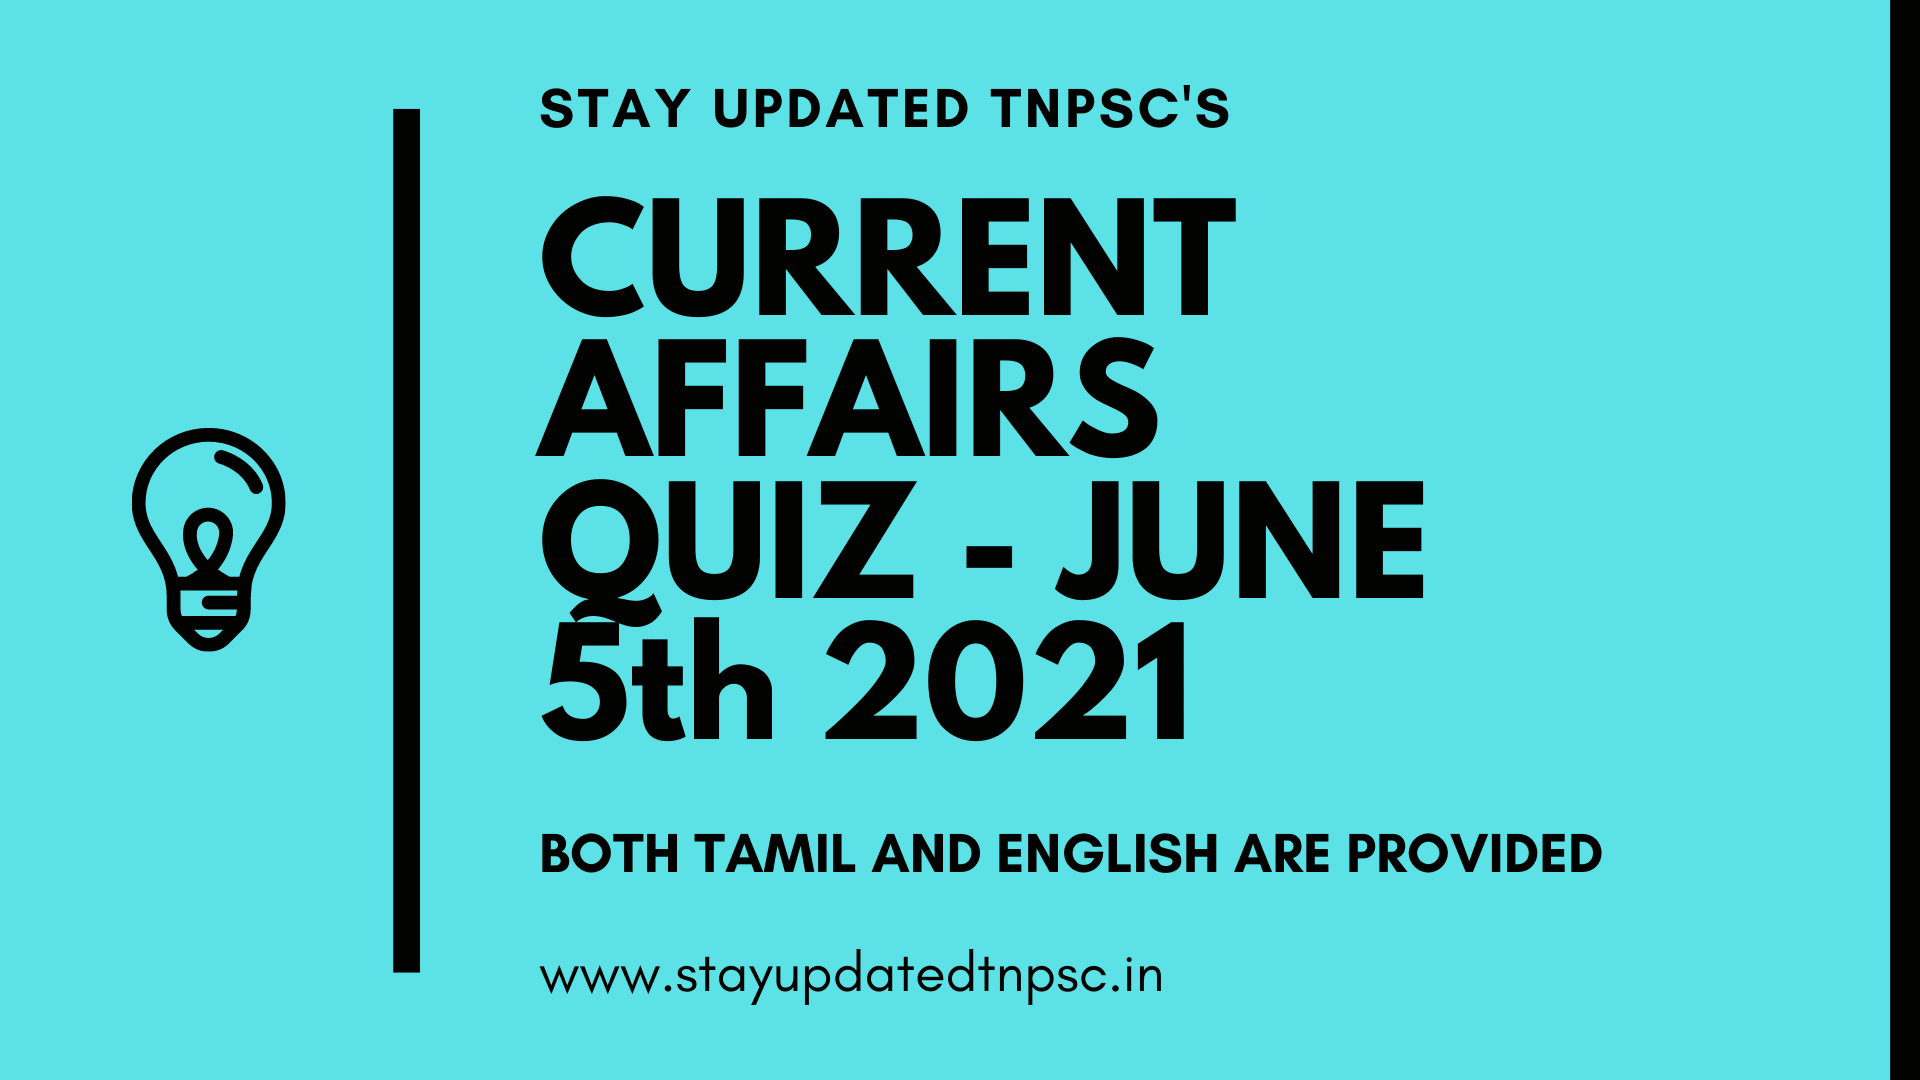 TNPSC DAILY CURRENT AFFAIRS: 05 JUNE 2021